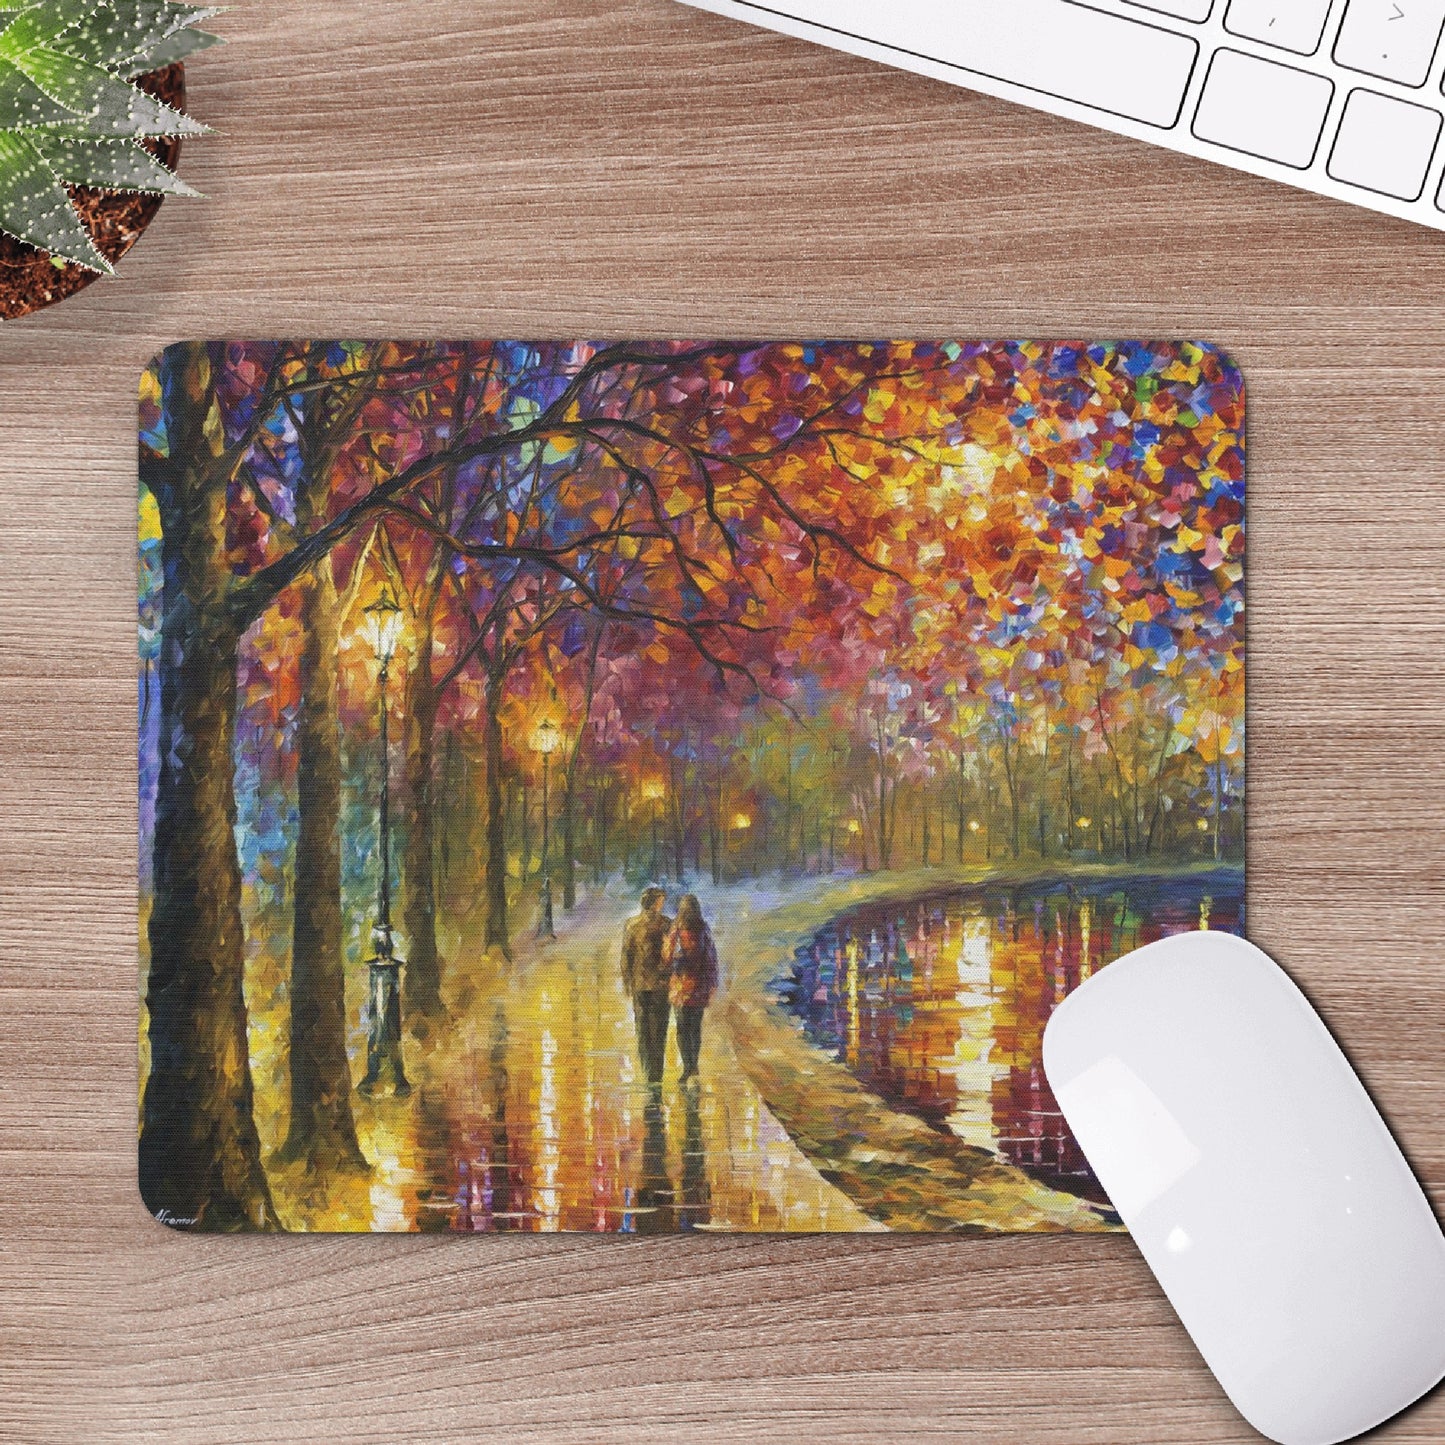 Mouse Pads Afremov Spirits By The Lake